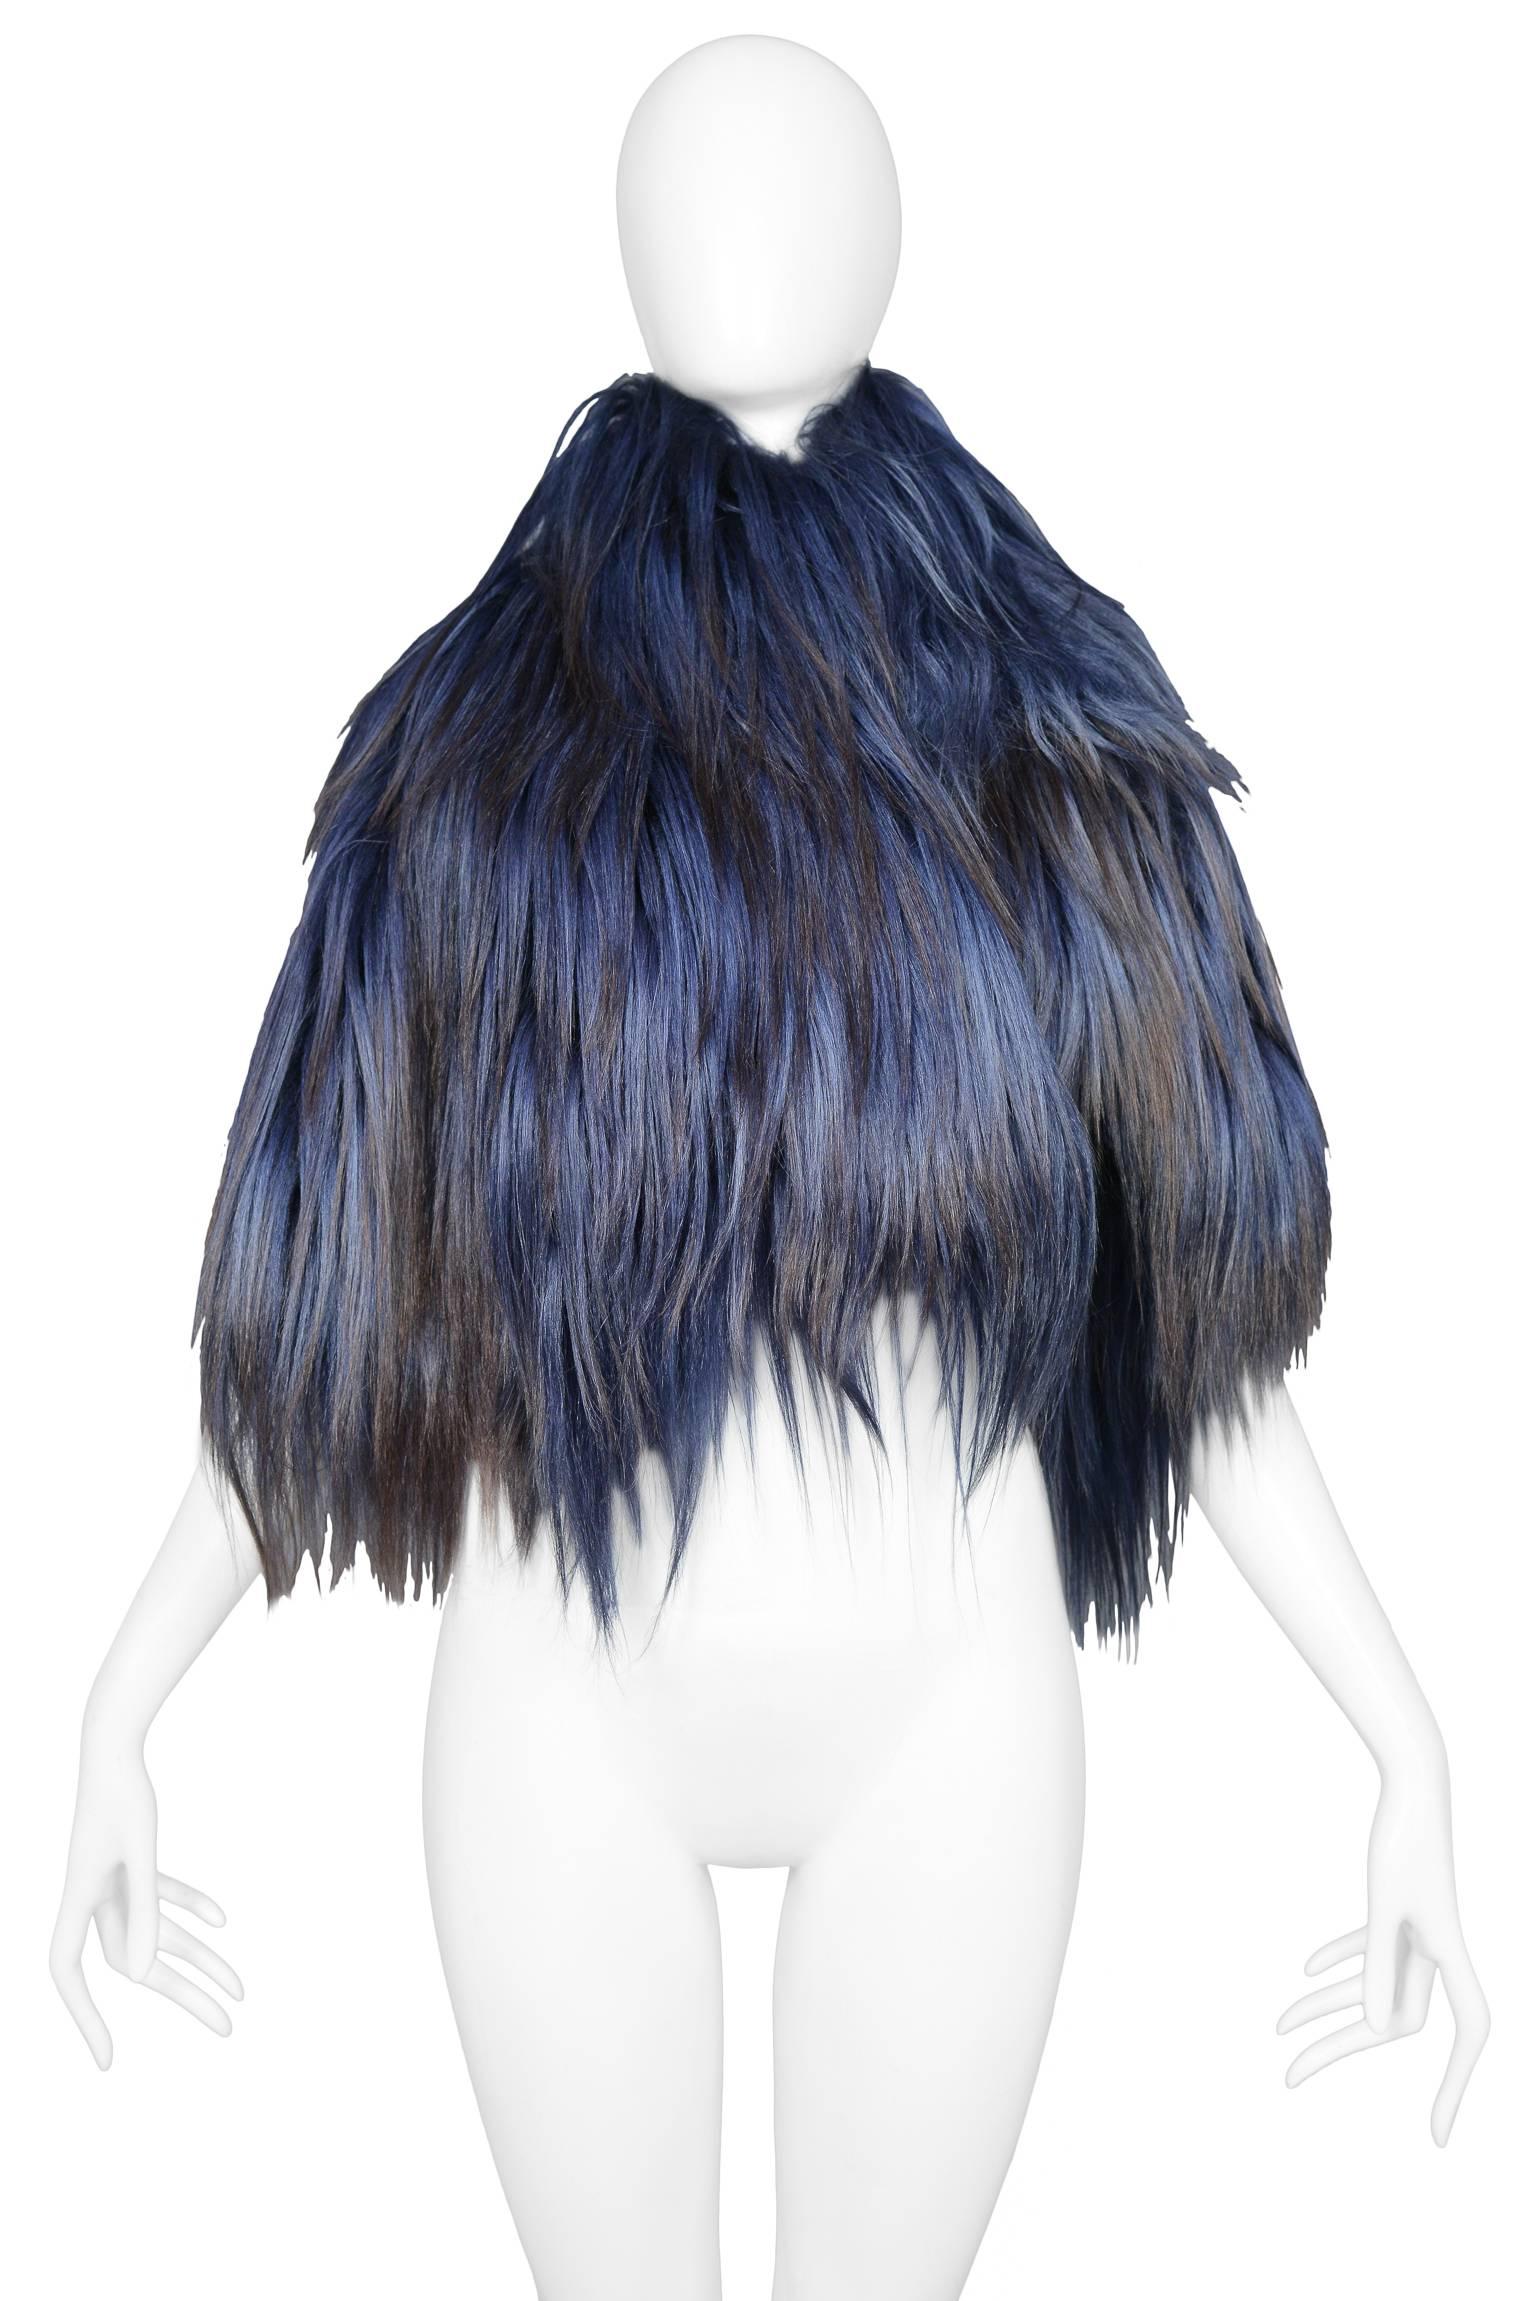 Vintage Ann Demeulemeester ombre blue and black goat fur vest. Runway piece from the Autumn / Winter 2011 Collection.

Fits like a size small or small medium. 